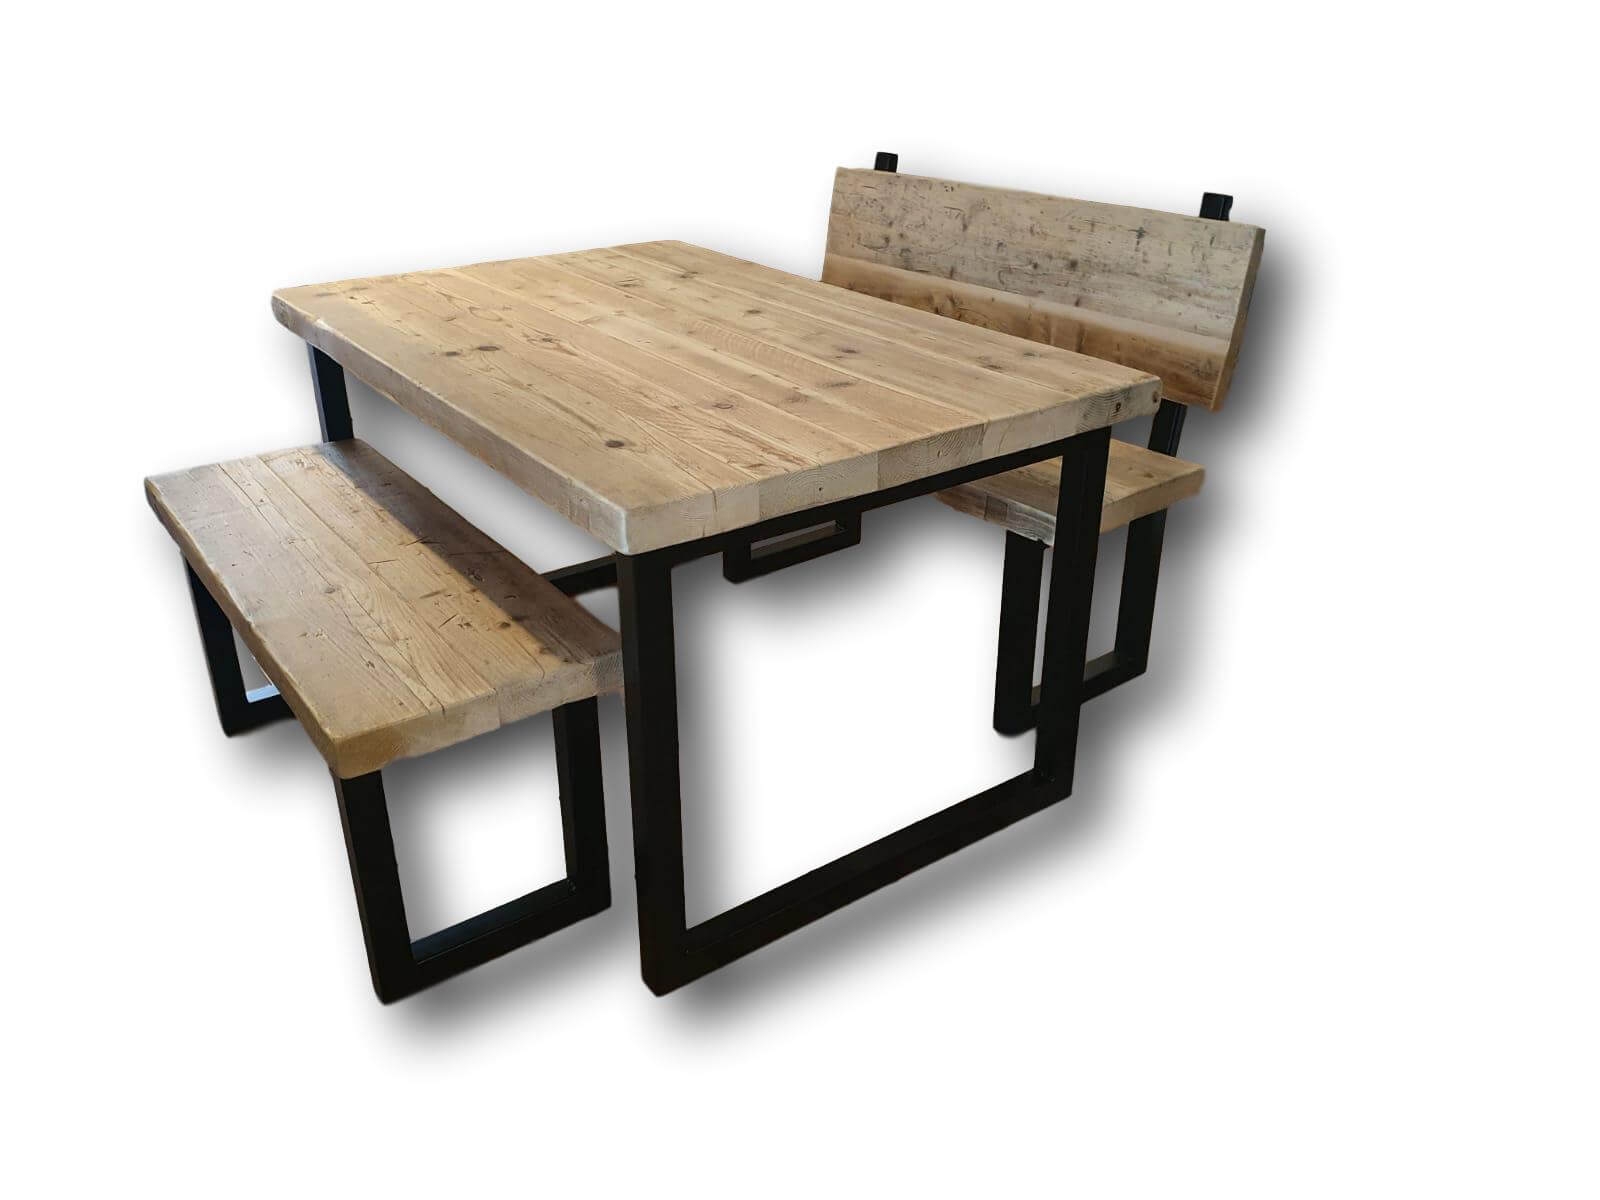 The Reclaimed Rustic Weathered Table – Design Your Own Dining Table 140cm x 70cm1 bench (to fit between table legs) – Acumen Collection